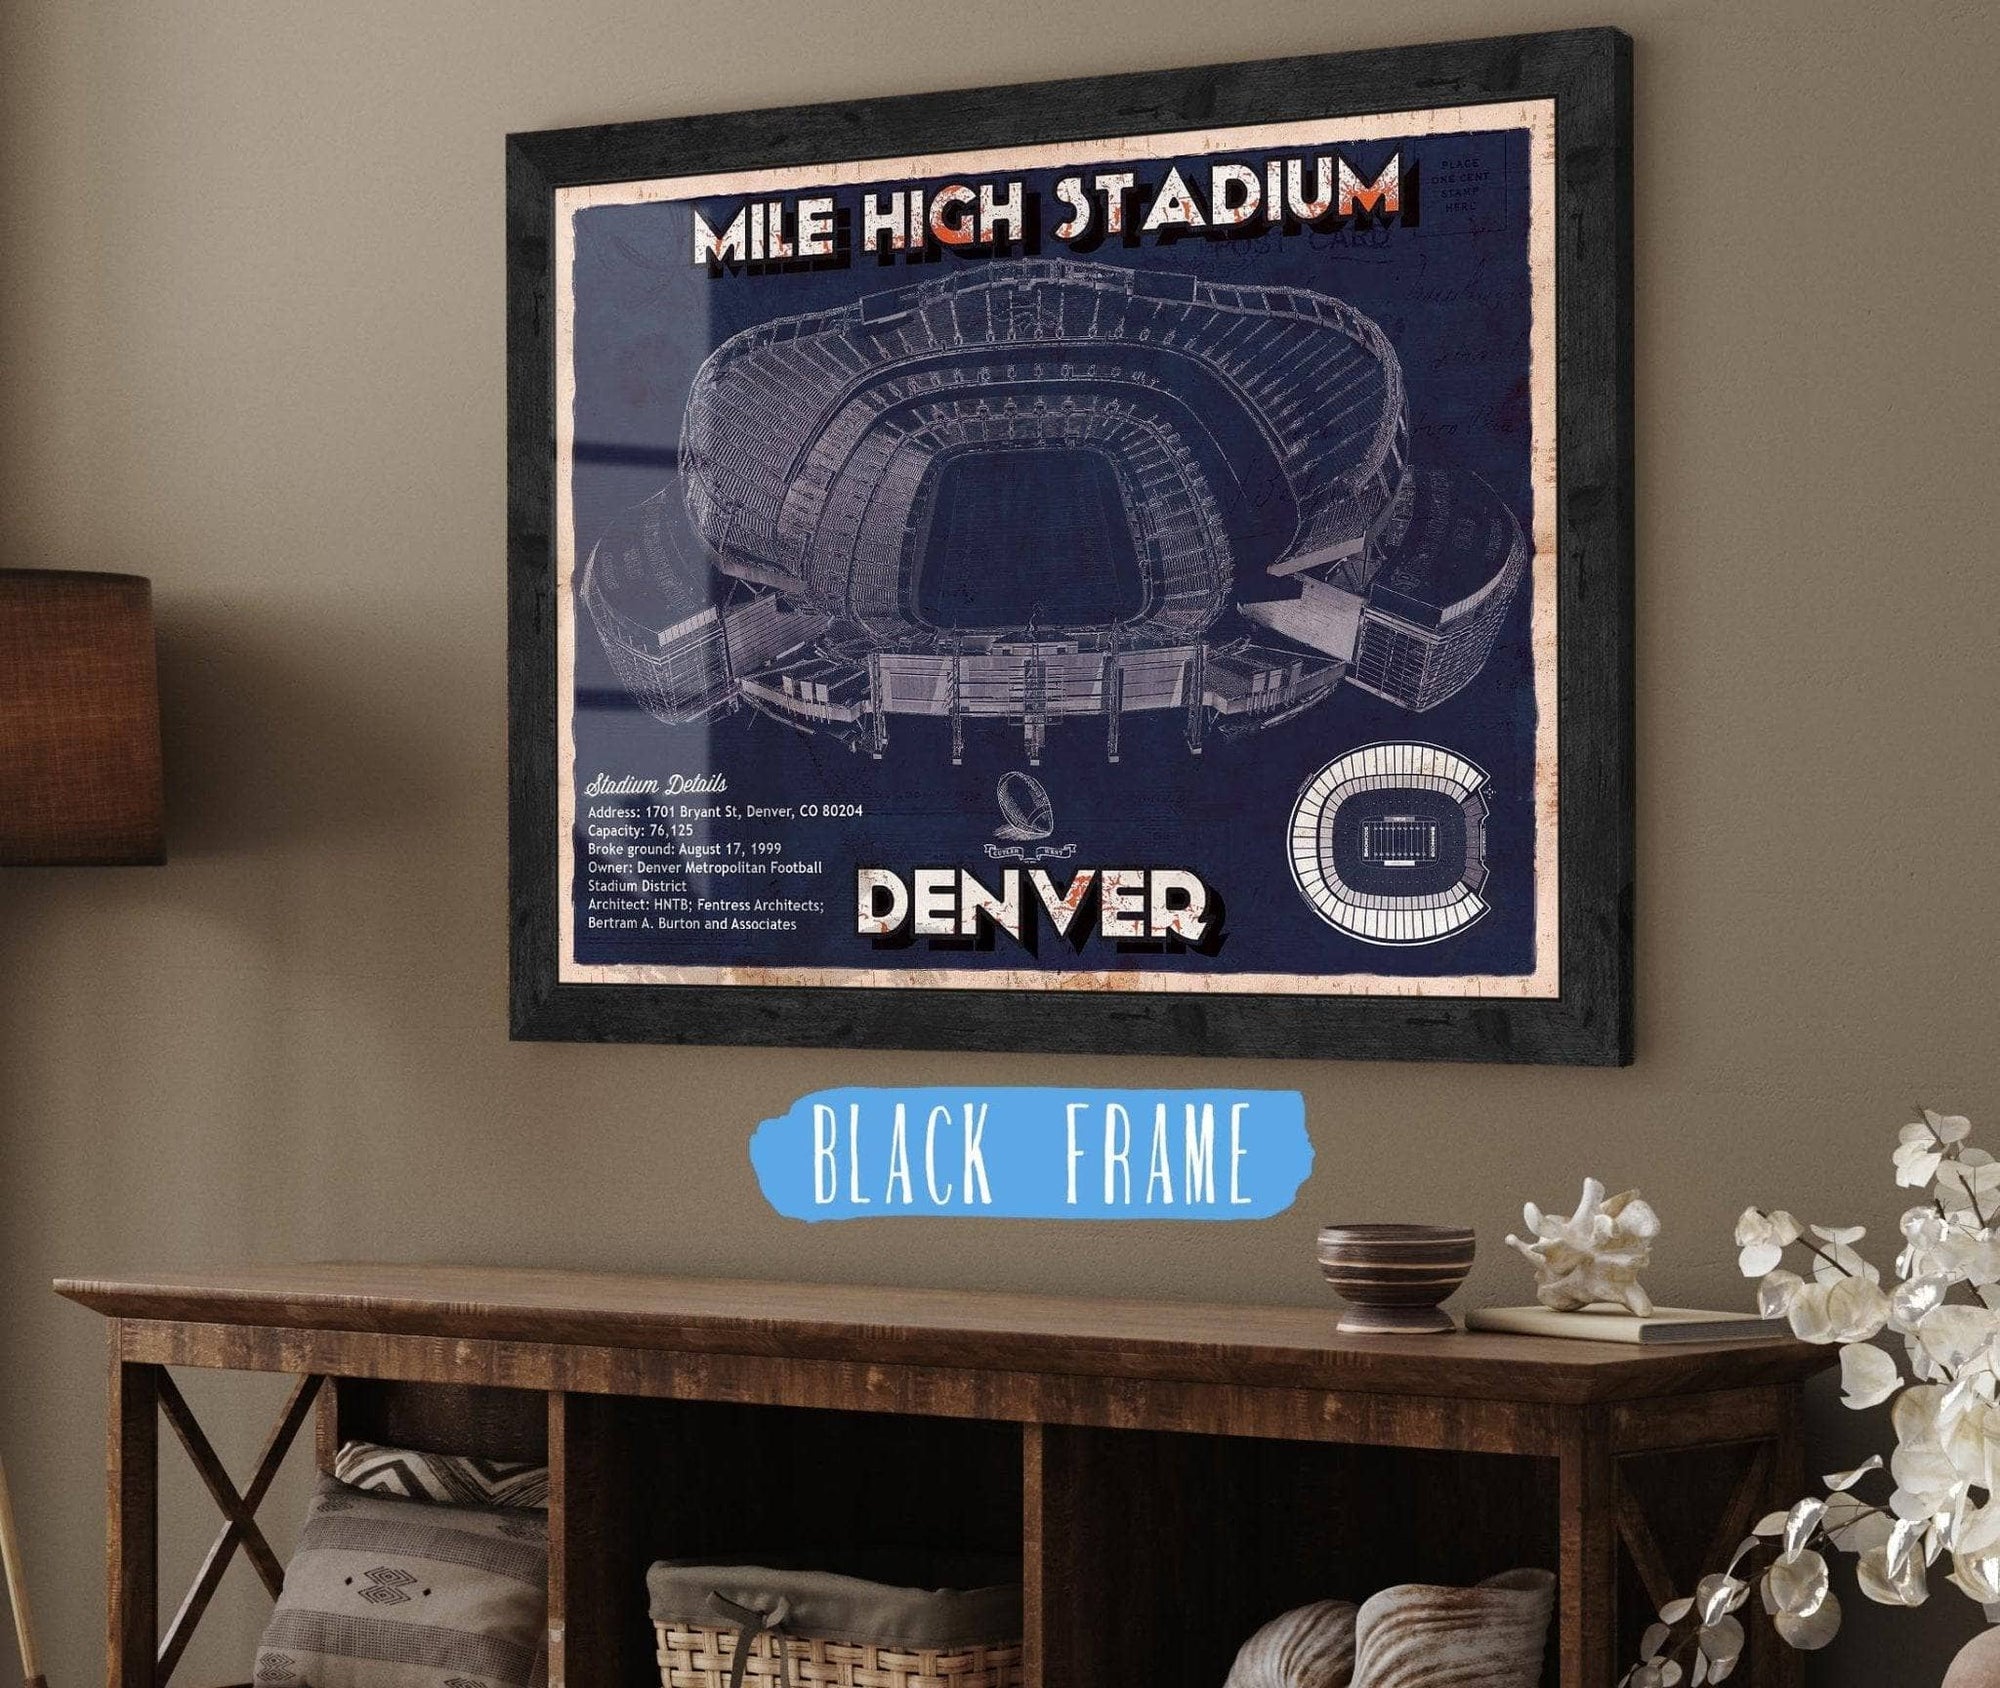 Cutler West Pro Football Collection 14" x 11" / Black Frame Denver Broncos Vintage Sports Authority Field - Vintage Football Print 635800348-TOP_55470